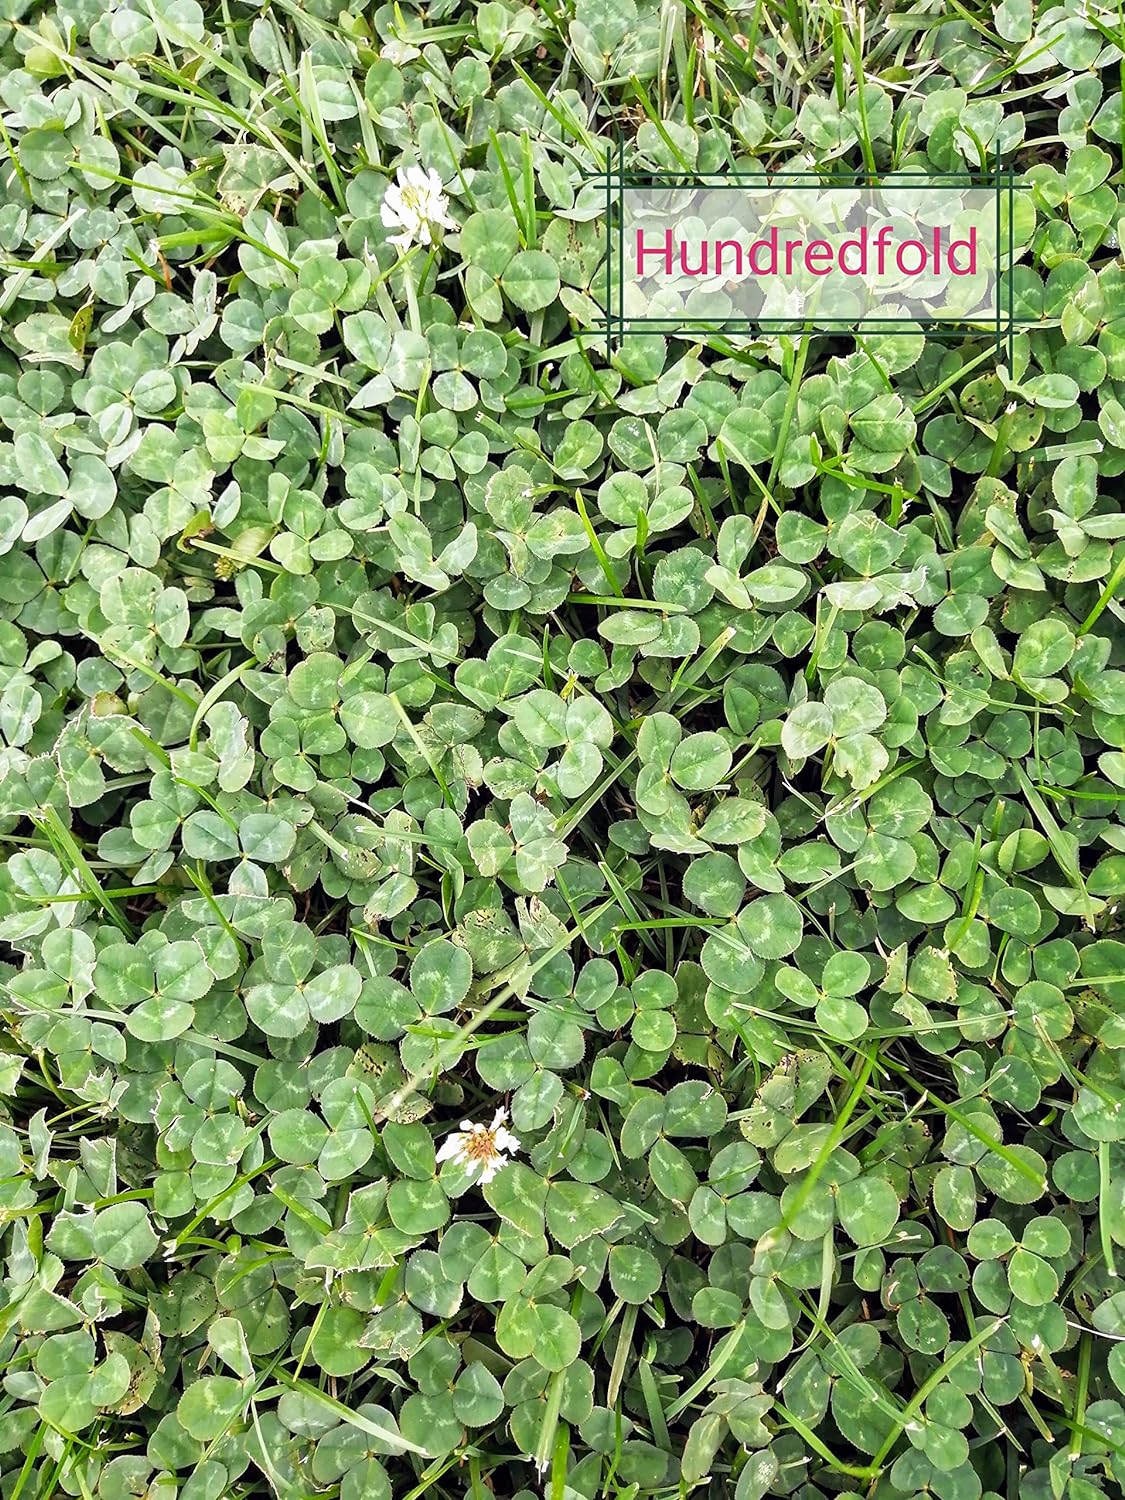 Hundredfold 4lbs (1816g) Dutch White Clover Seeds - Trifolium repens Perennial Legume, Cover Crop, Ground Cover, Green Manure, Pasture, Product of Canada